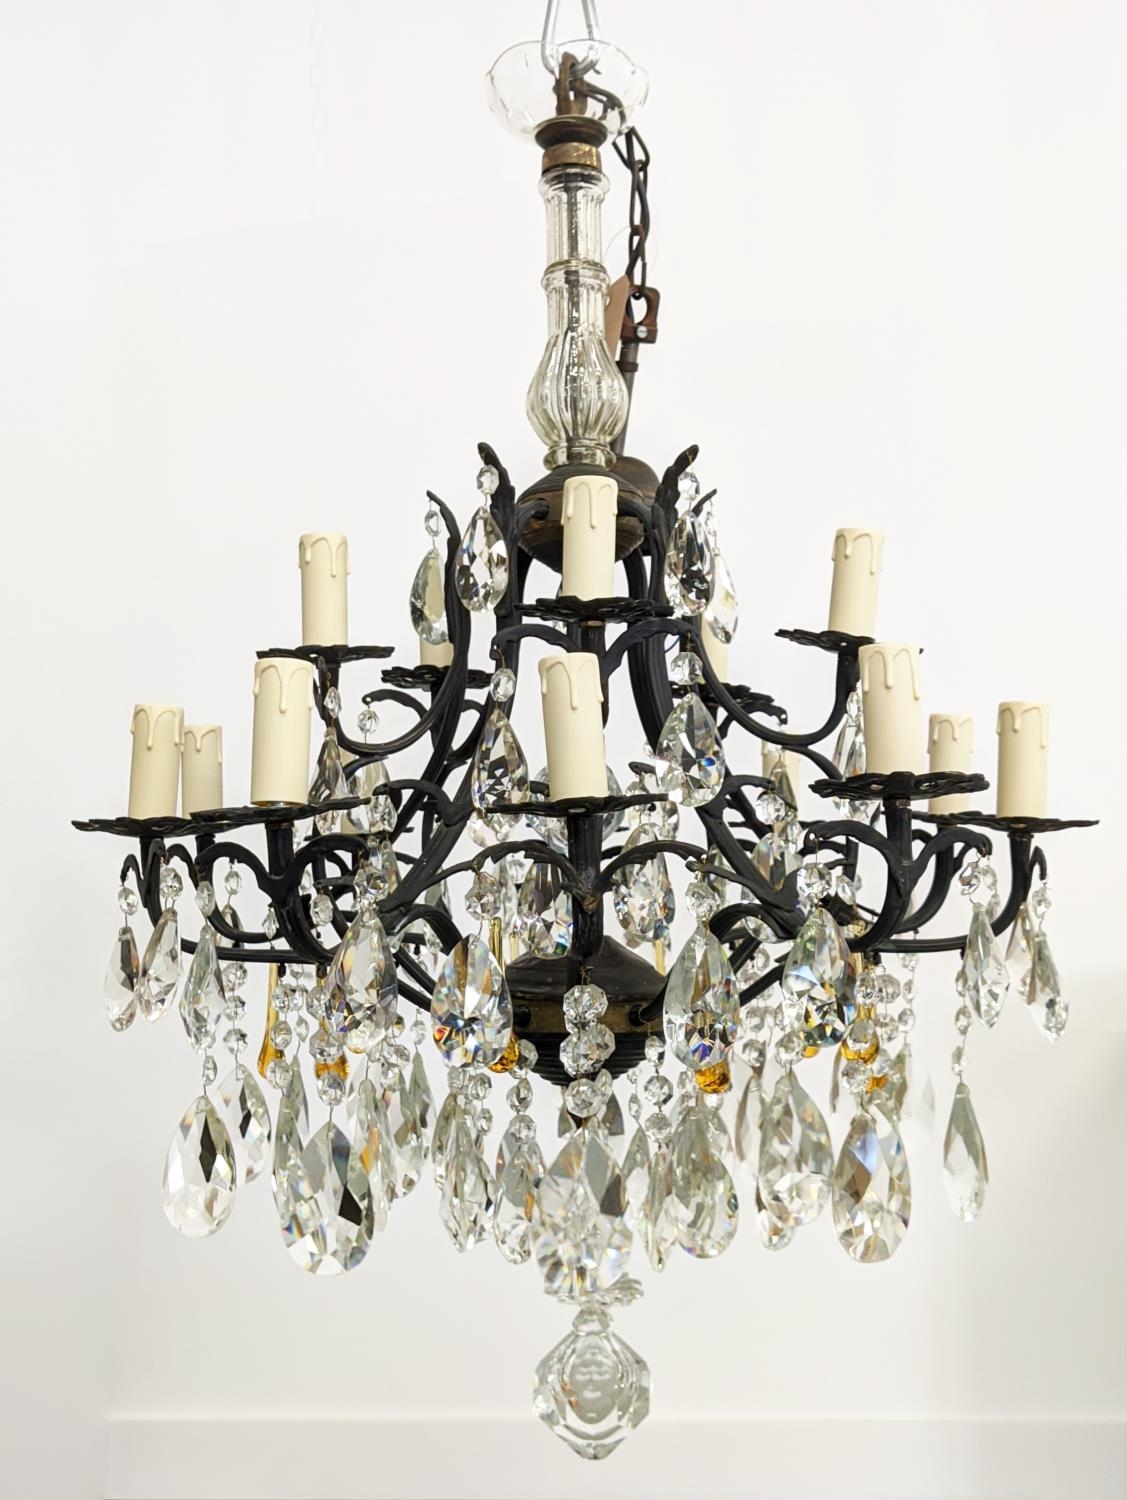 CHANDELIER, patinated metal with clear and amber glass drops from fifteen lights, 60cm W x 114cm - Image 2 of 18